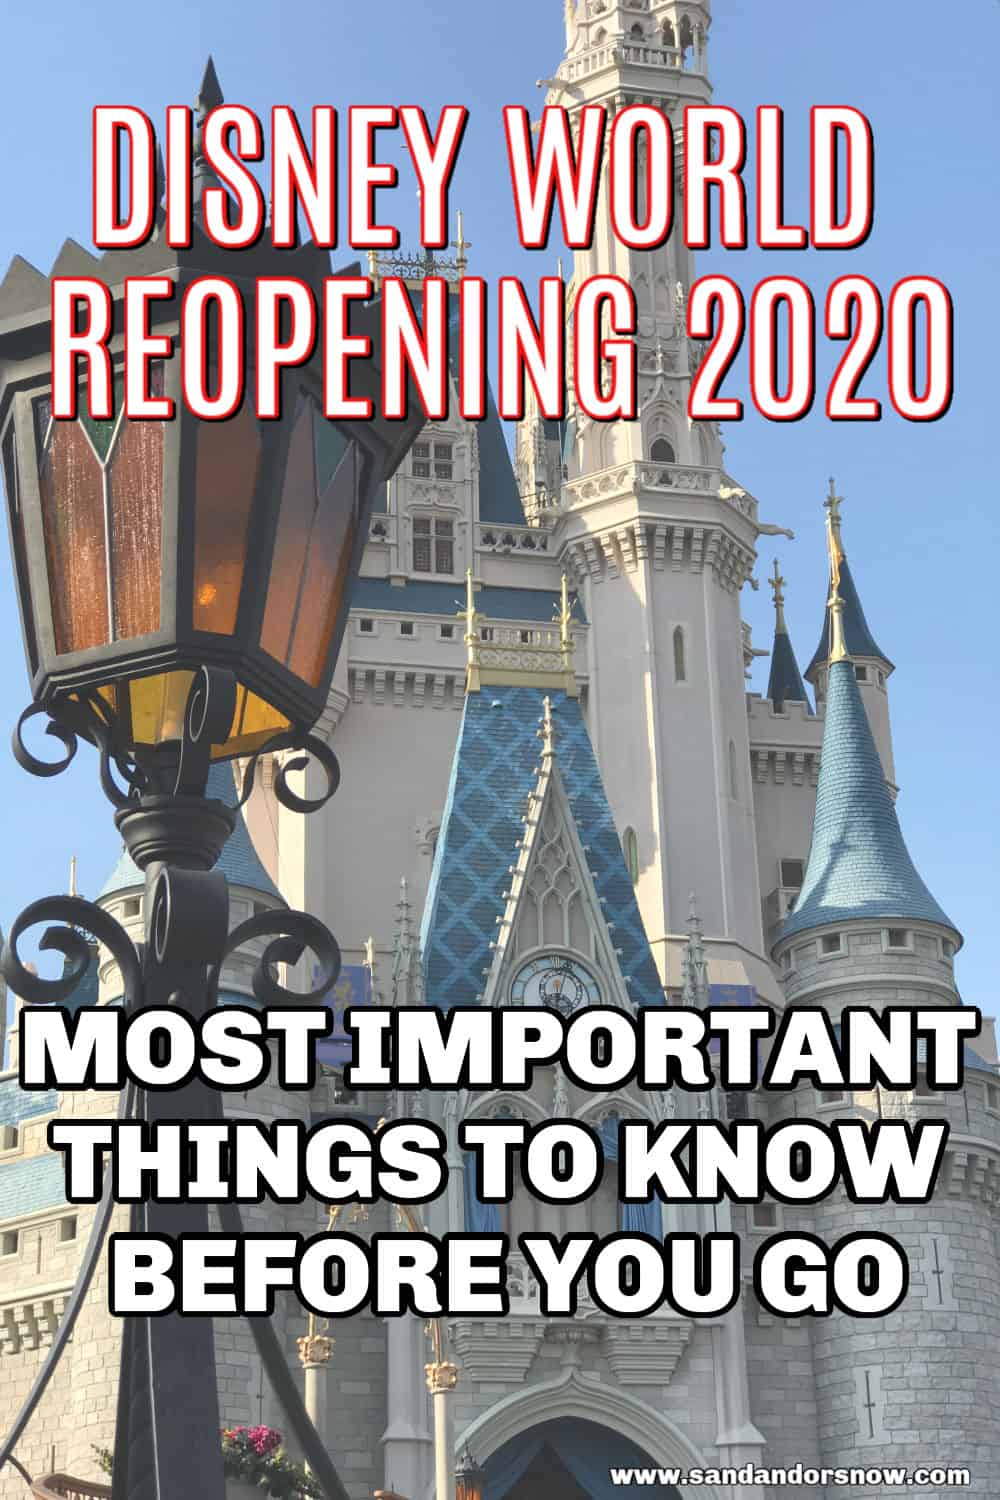 Planning (or replanning) a visit to Walt Disney World and want the scoop on protocols, what will be opened, attendance, and reservations? Here are the most important things to know about Disney World reopening 2020! #Disney #WDW #DisneyWorld2020 #FamilyTravel #DisneyReopening 